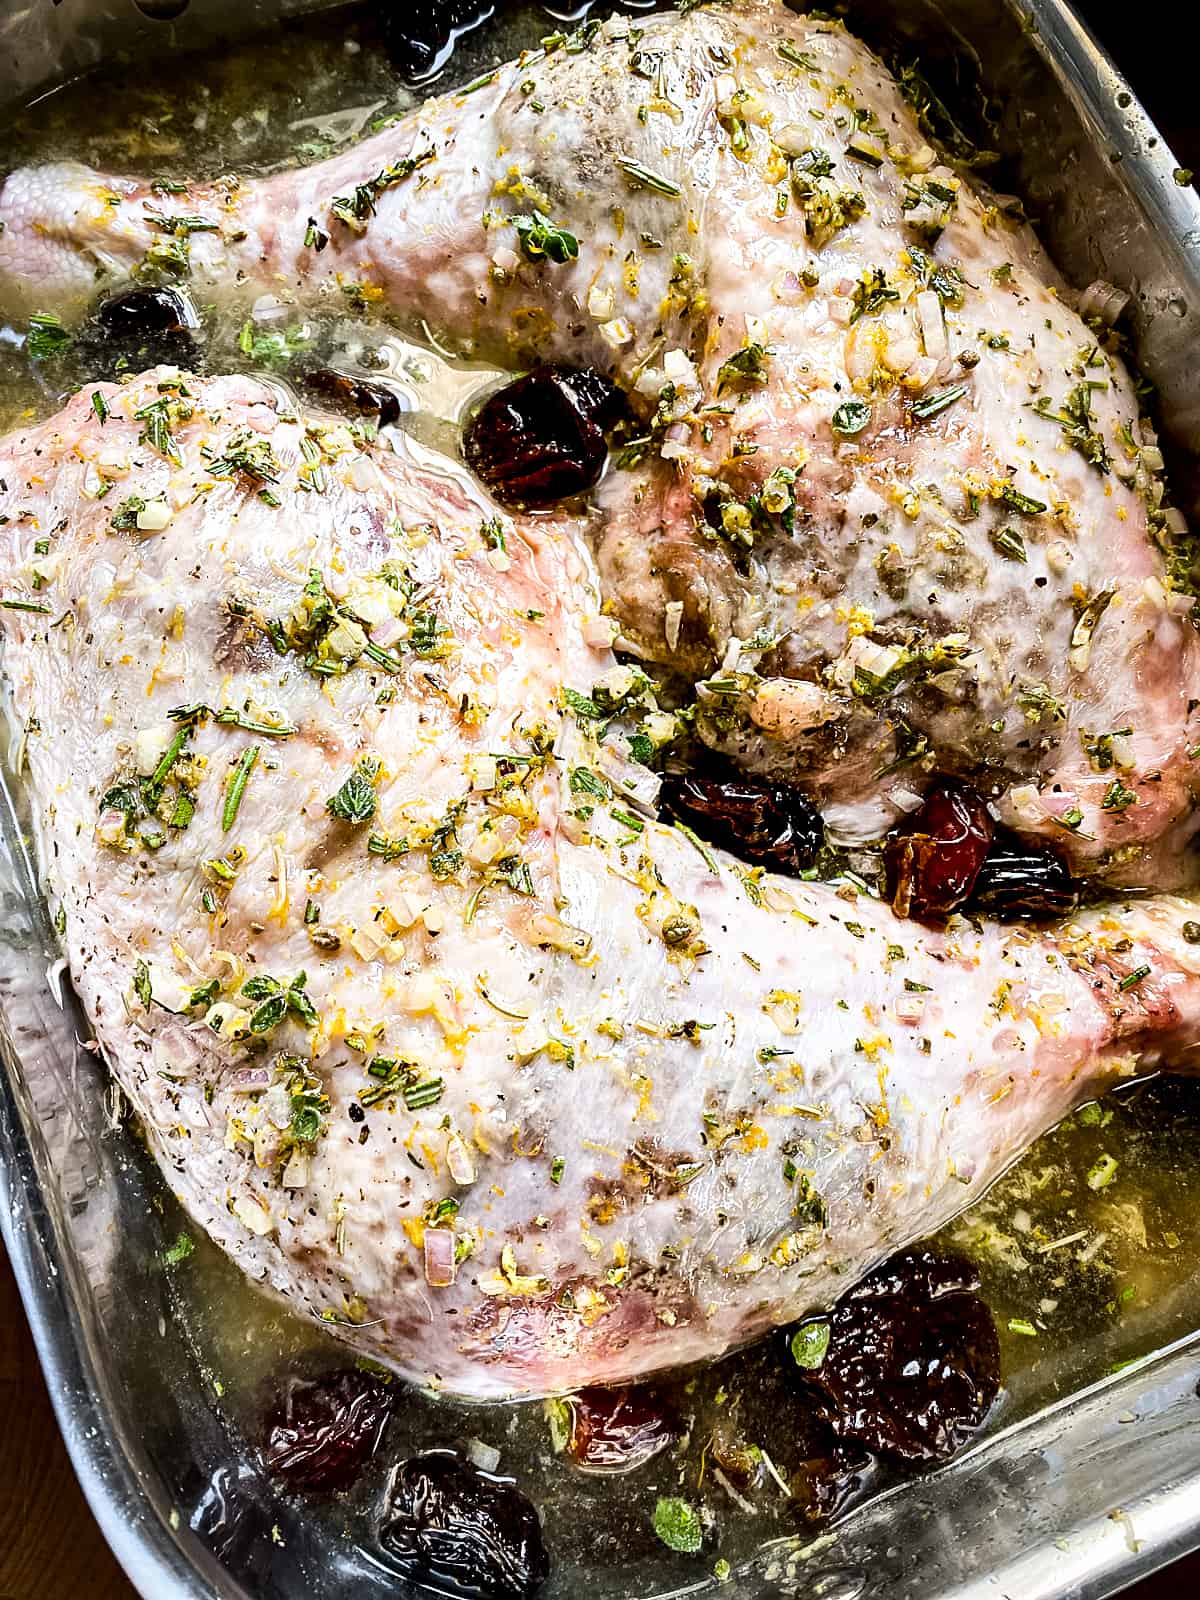 Turkey thighs with marinate all over them in a baking pan.